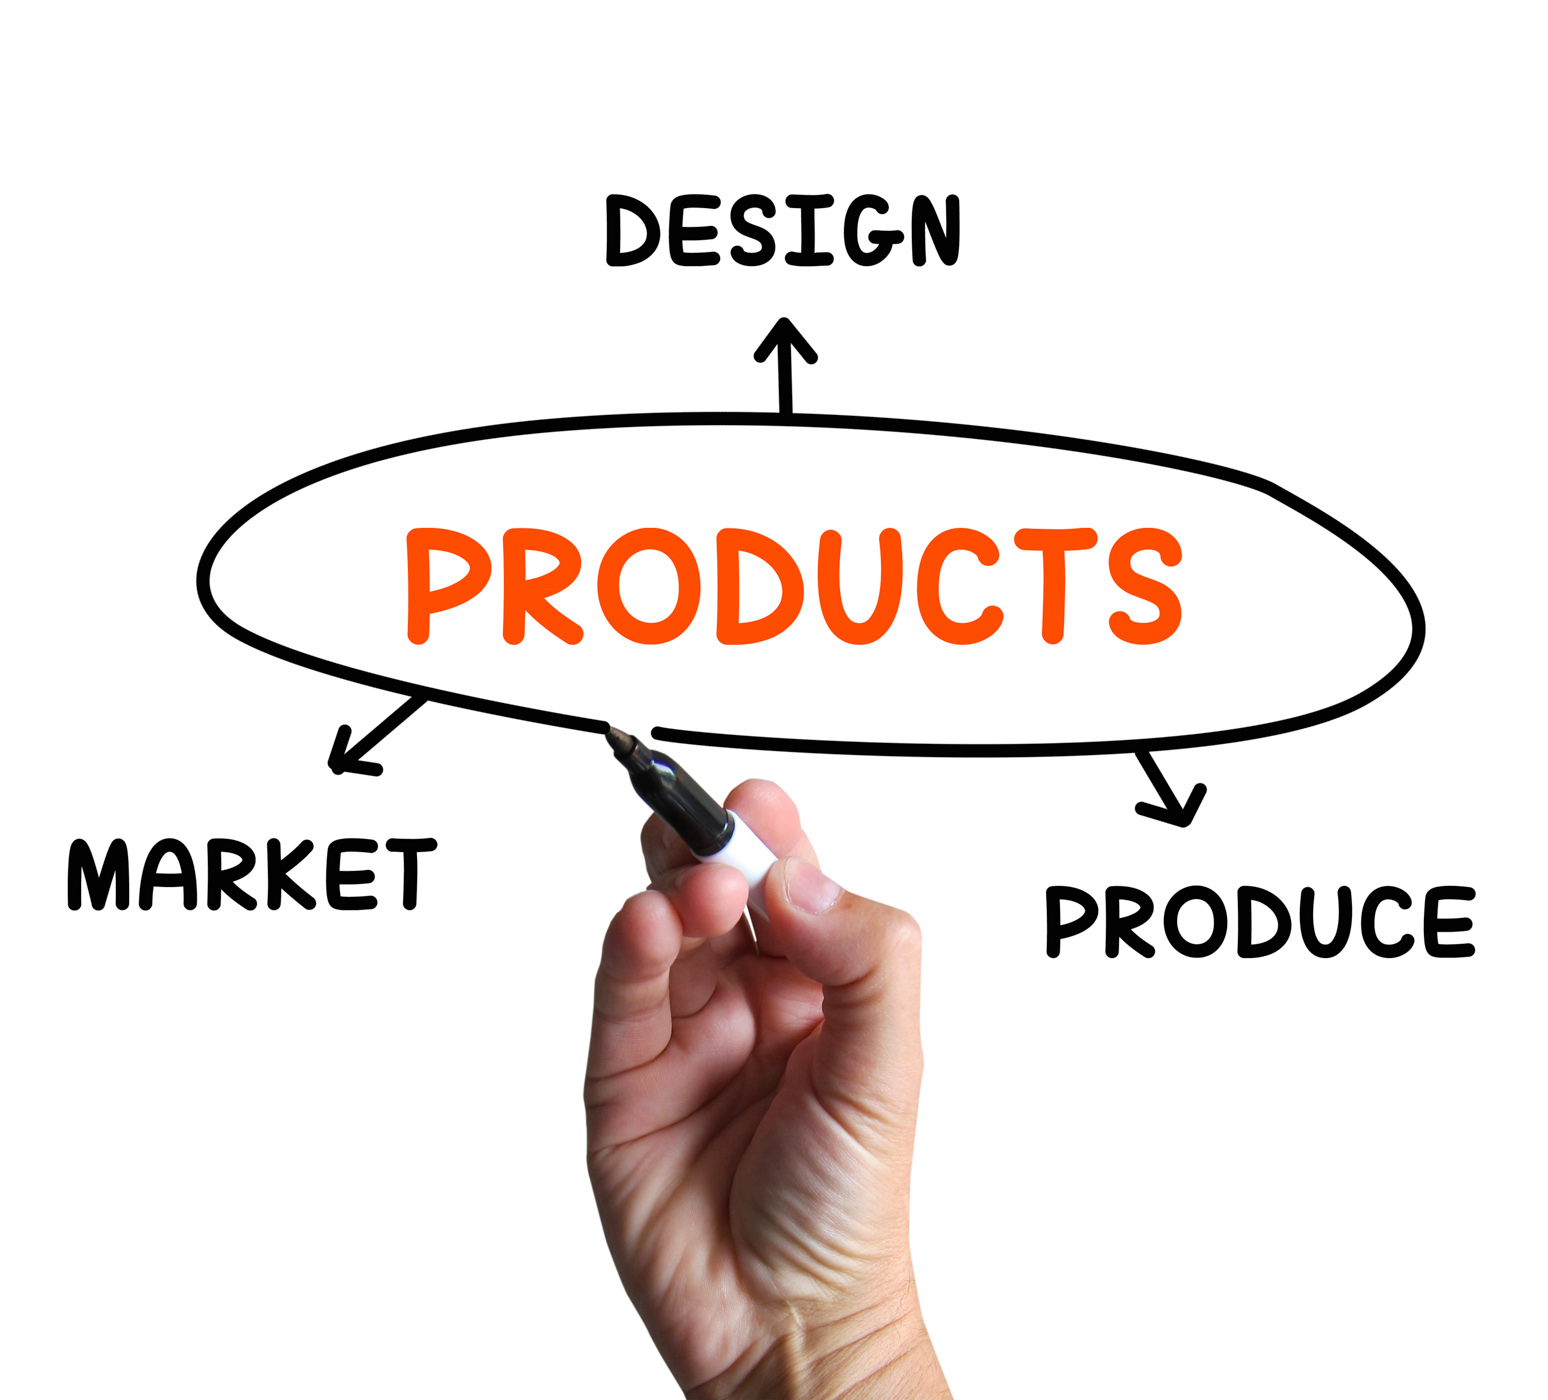 Products diagram shows designing and marketing goods photo